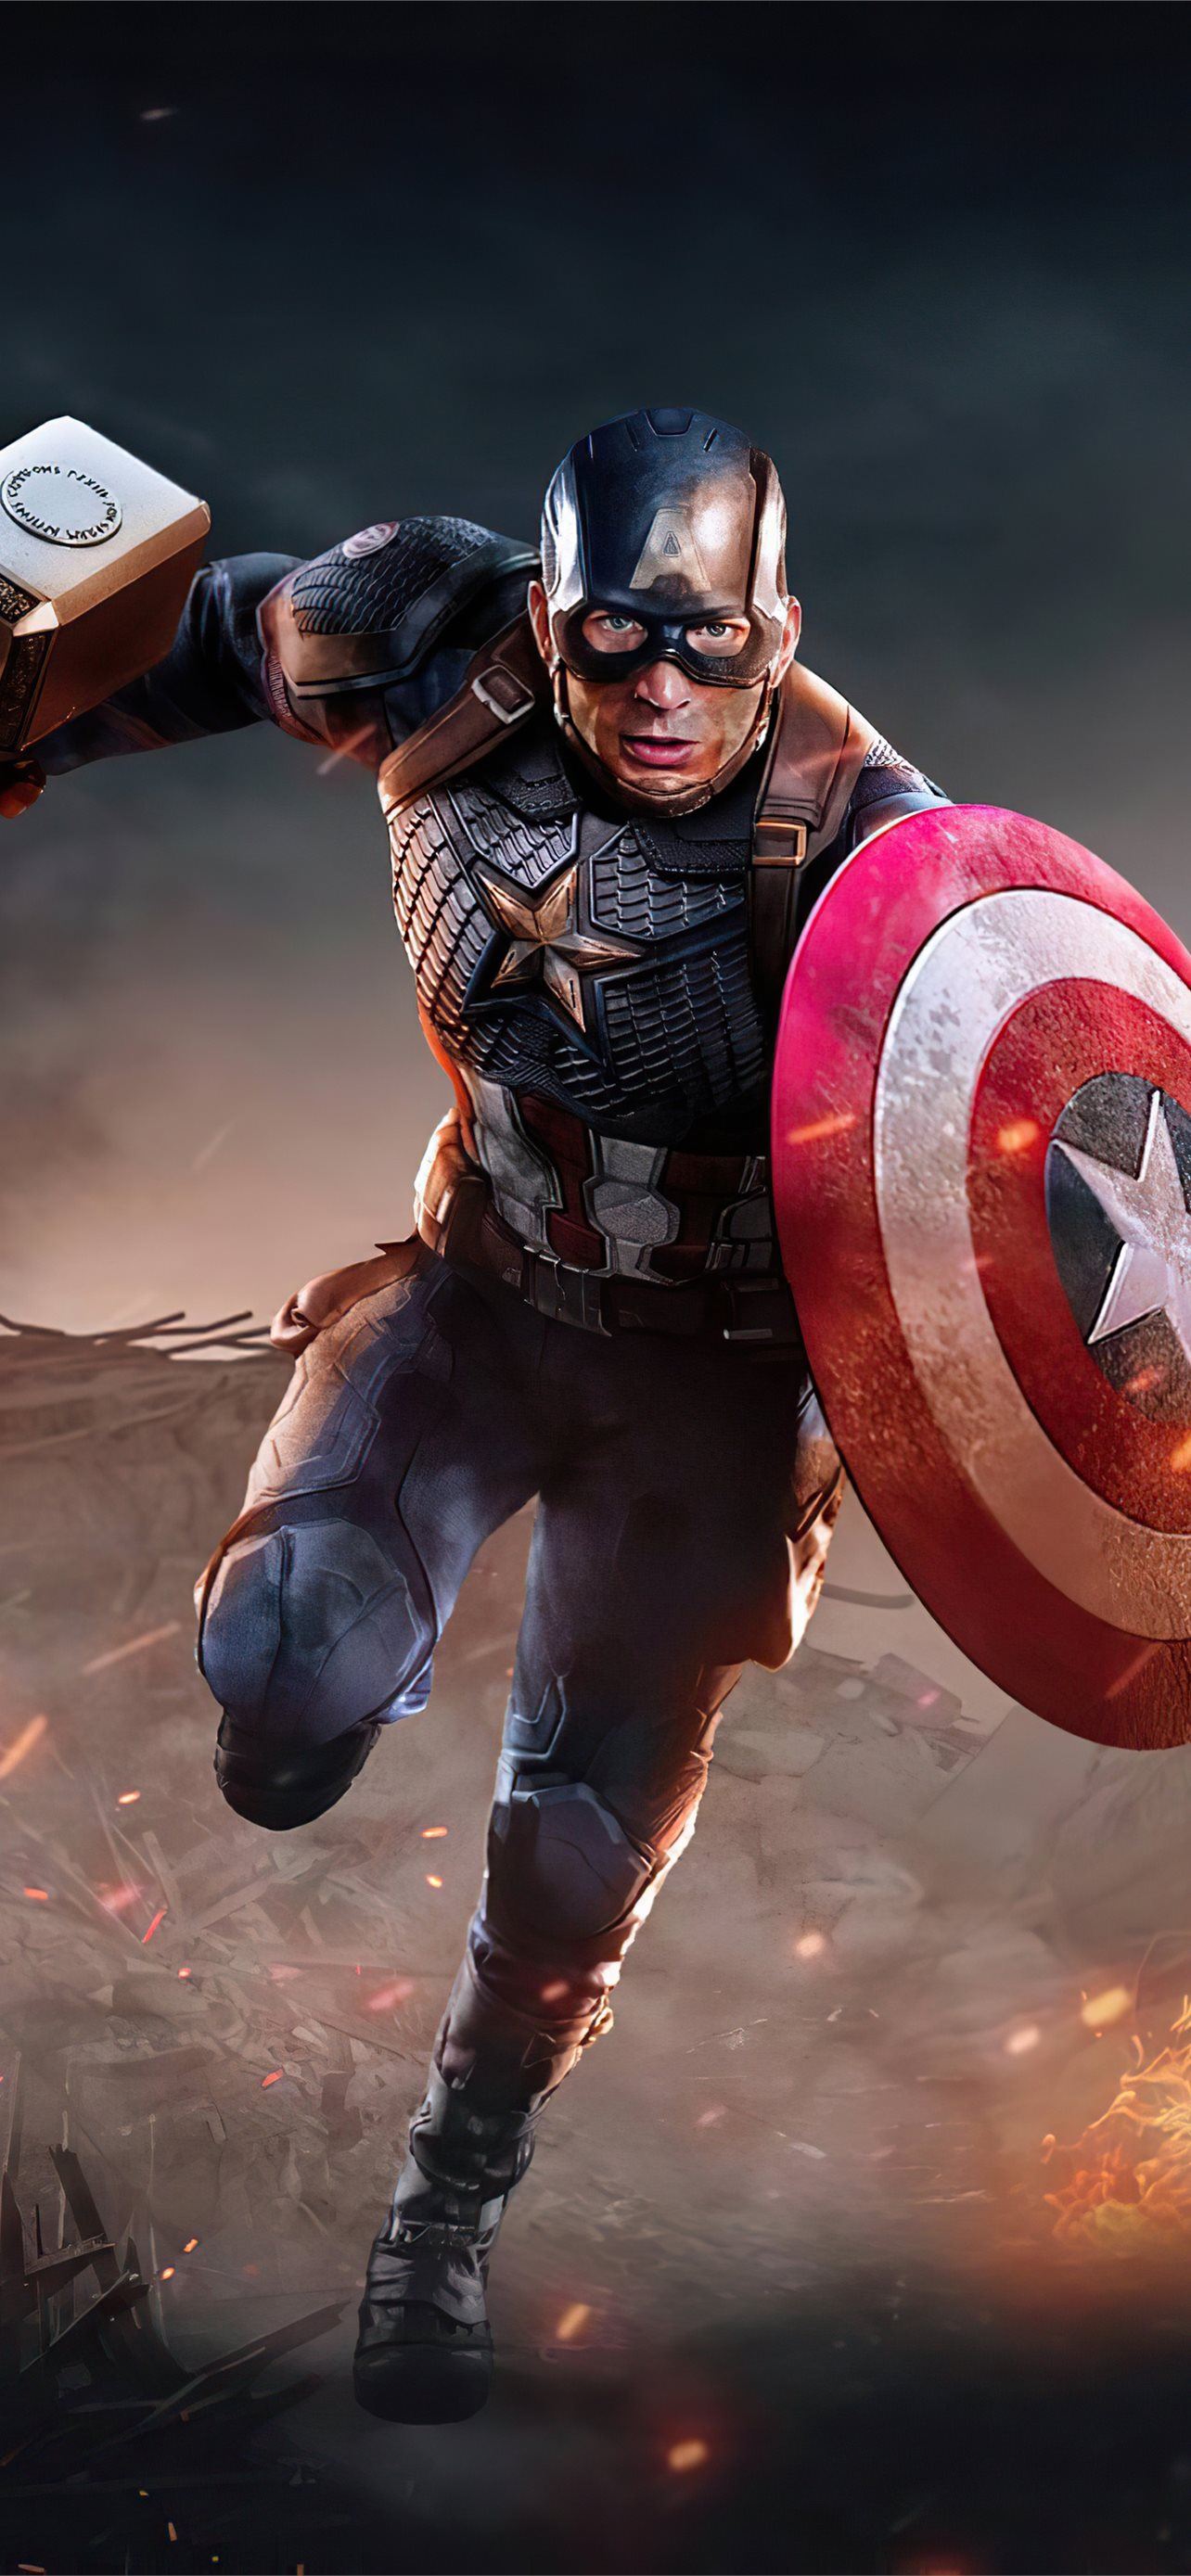 Captain America 2020 4k Samsung Galaxy Note 9 8 S9 iPhone Wallpapers  Free Download